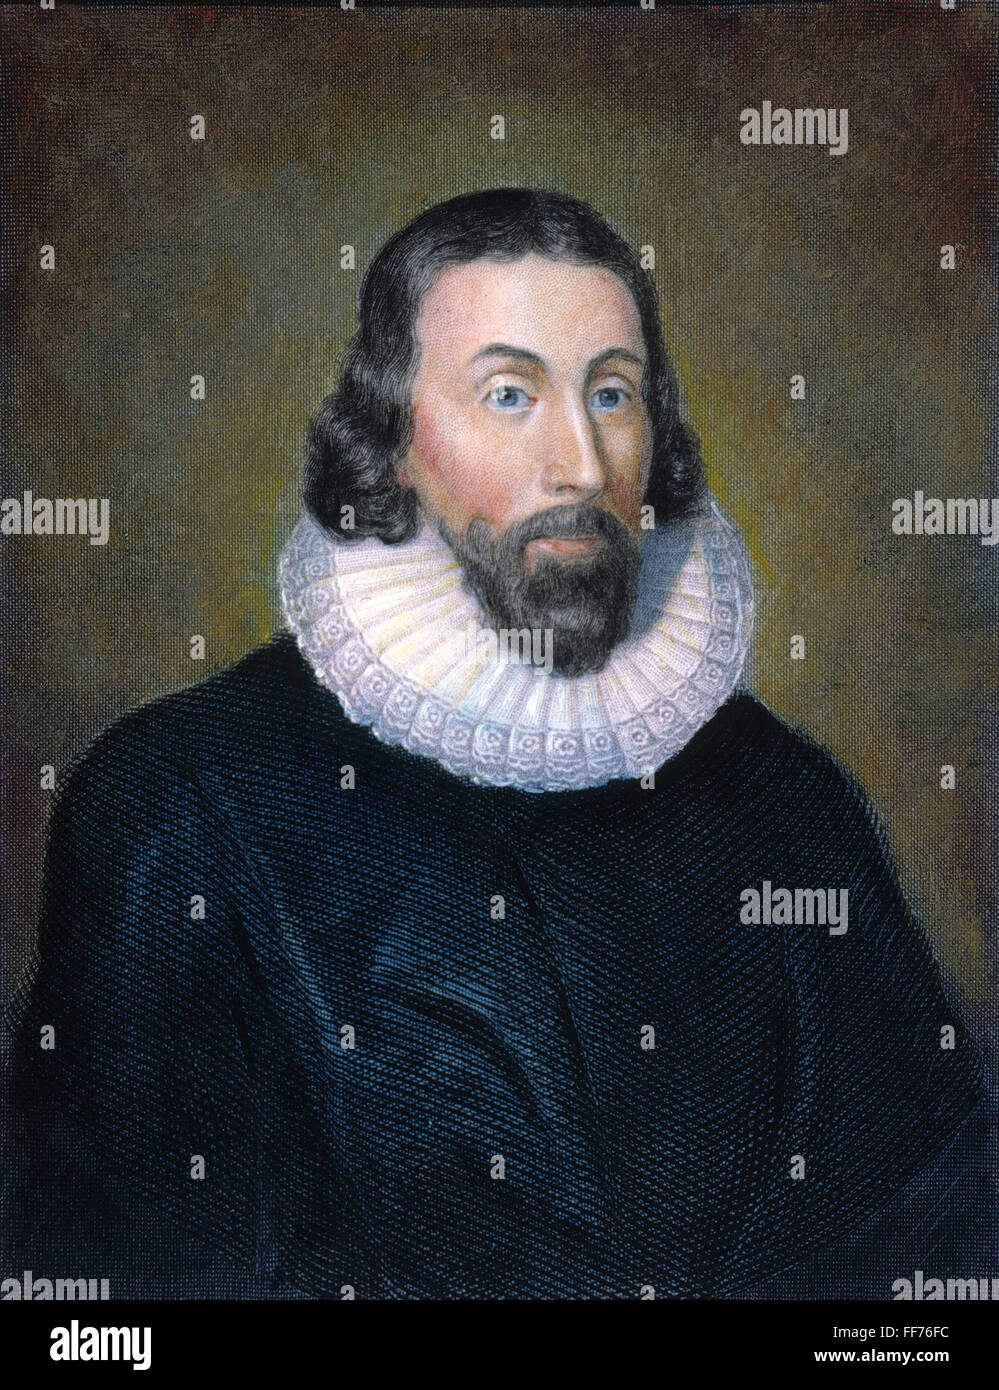 JOHN WINTHROP (1588-1649). /nAmerican colonist and first governor of Massachusetts Bay Colony. Steel engraving, 19th century. Stock Photo